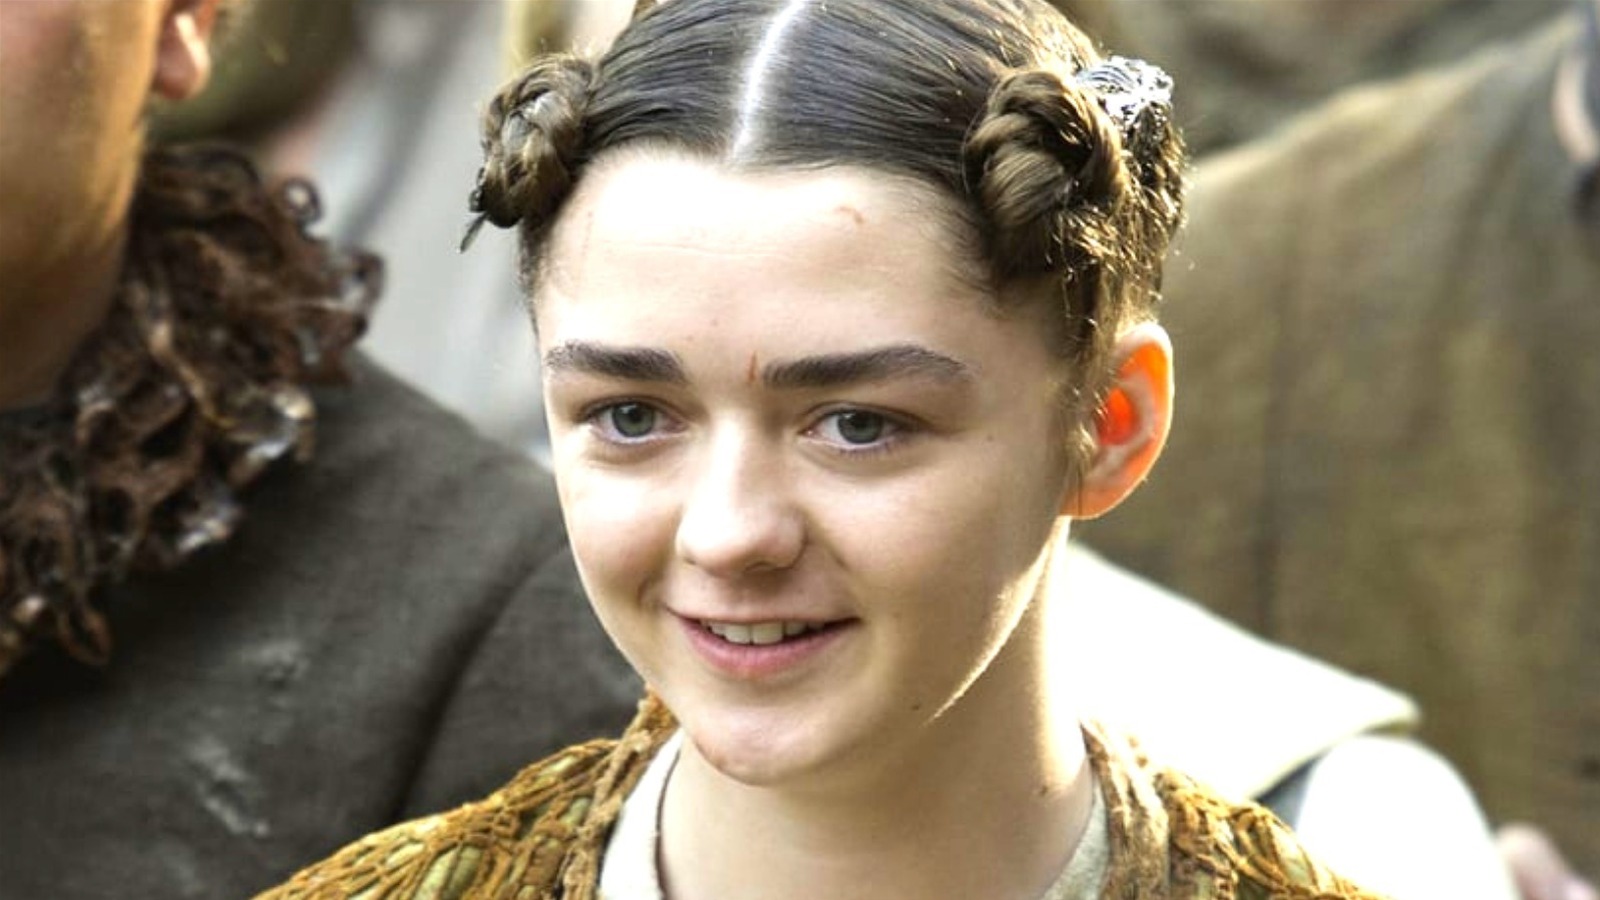 What You Didn't Notice About Arya's Costumes In Game Of Thrones